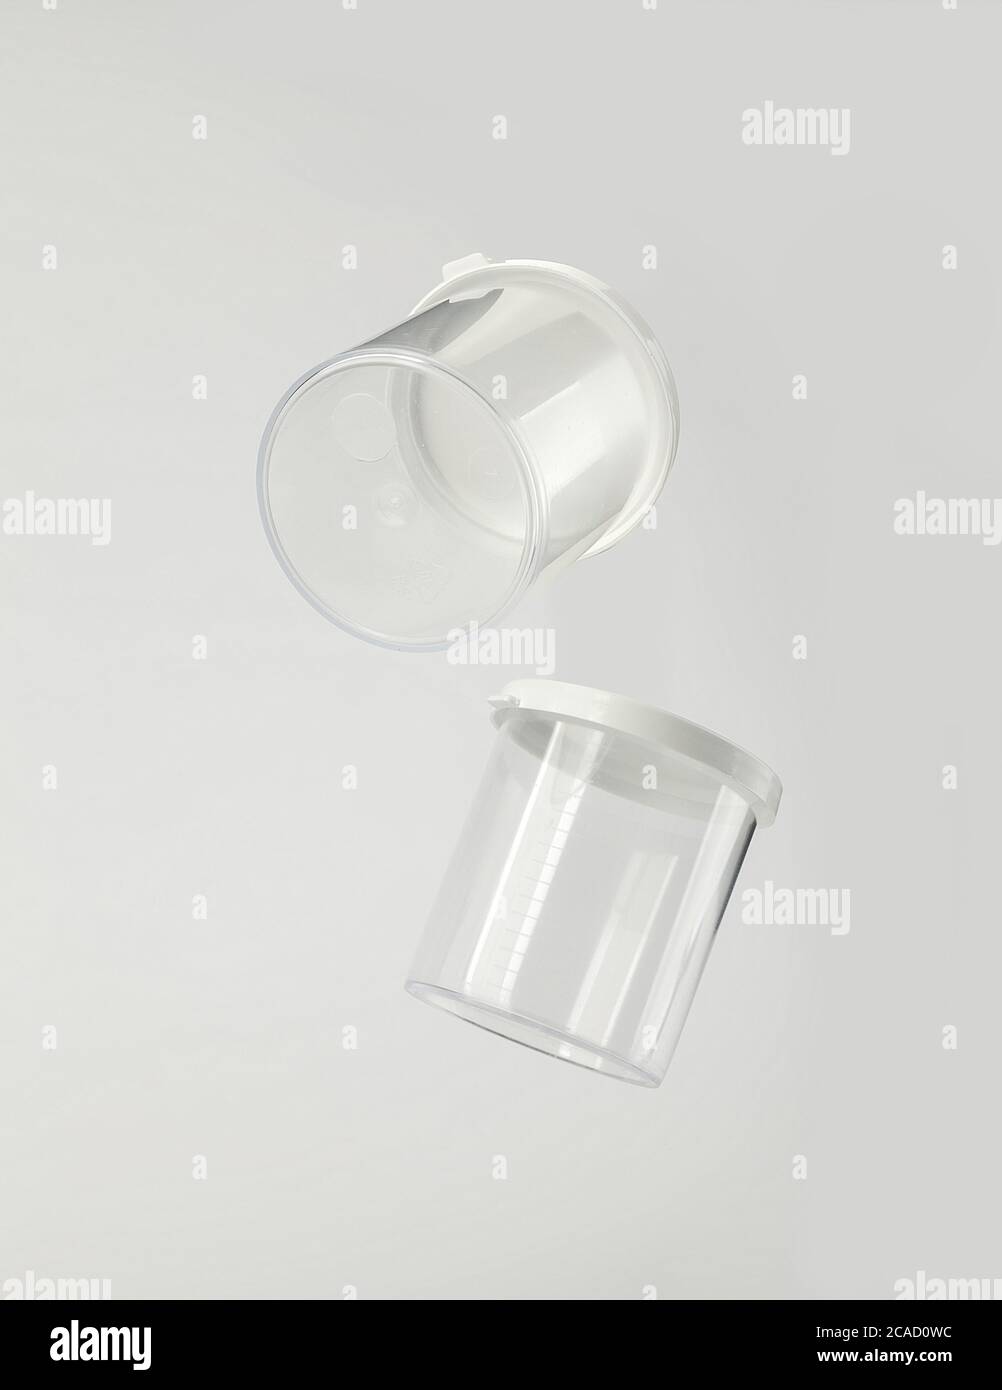 medical transparent plastic container with white lid, close up Stock Photo